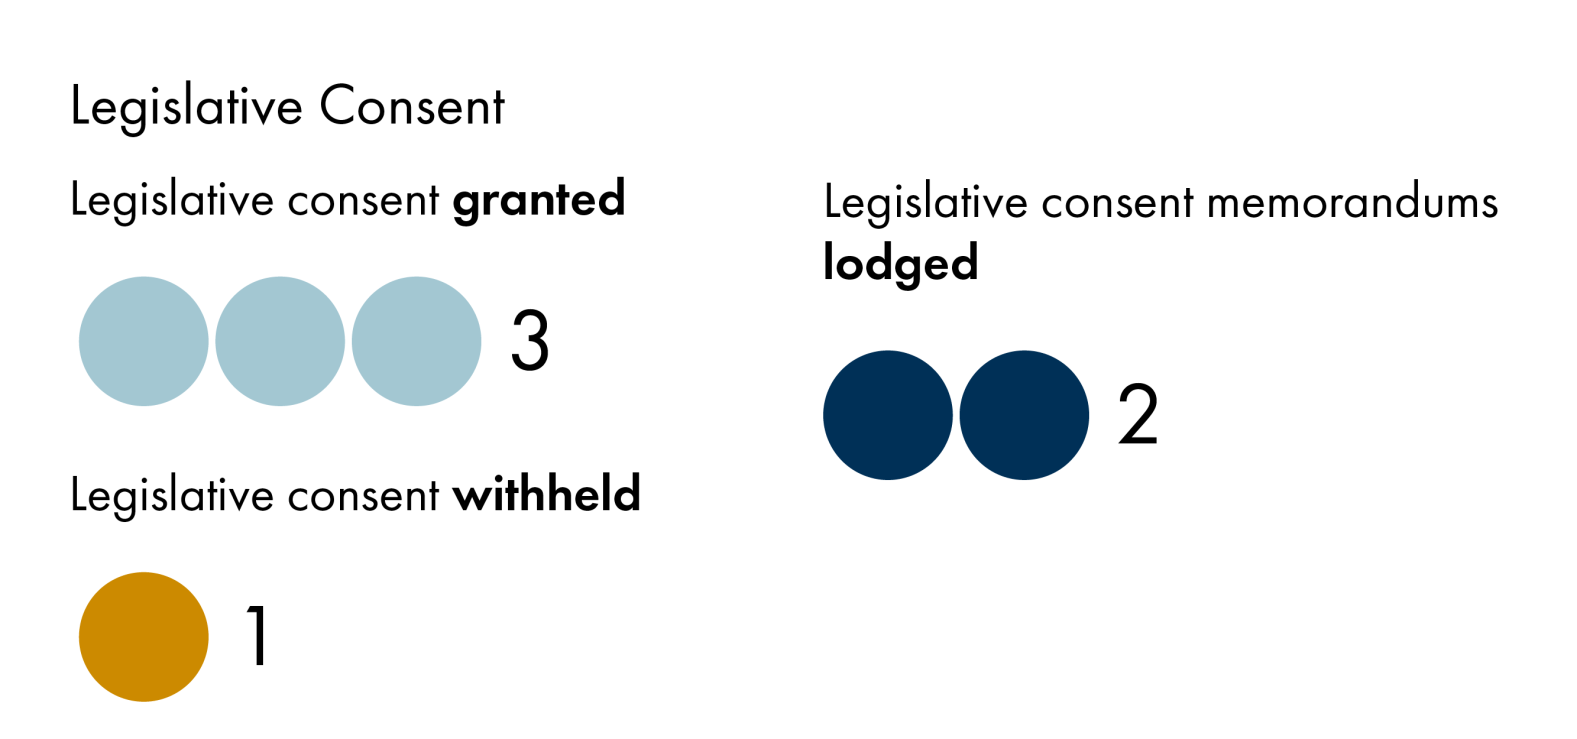 The infographic shows three circles under 'Legislative consent granted', 1 under 'Legislative consent withheld', and two under 'Legislative consent memorandums lodged'.